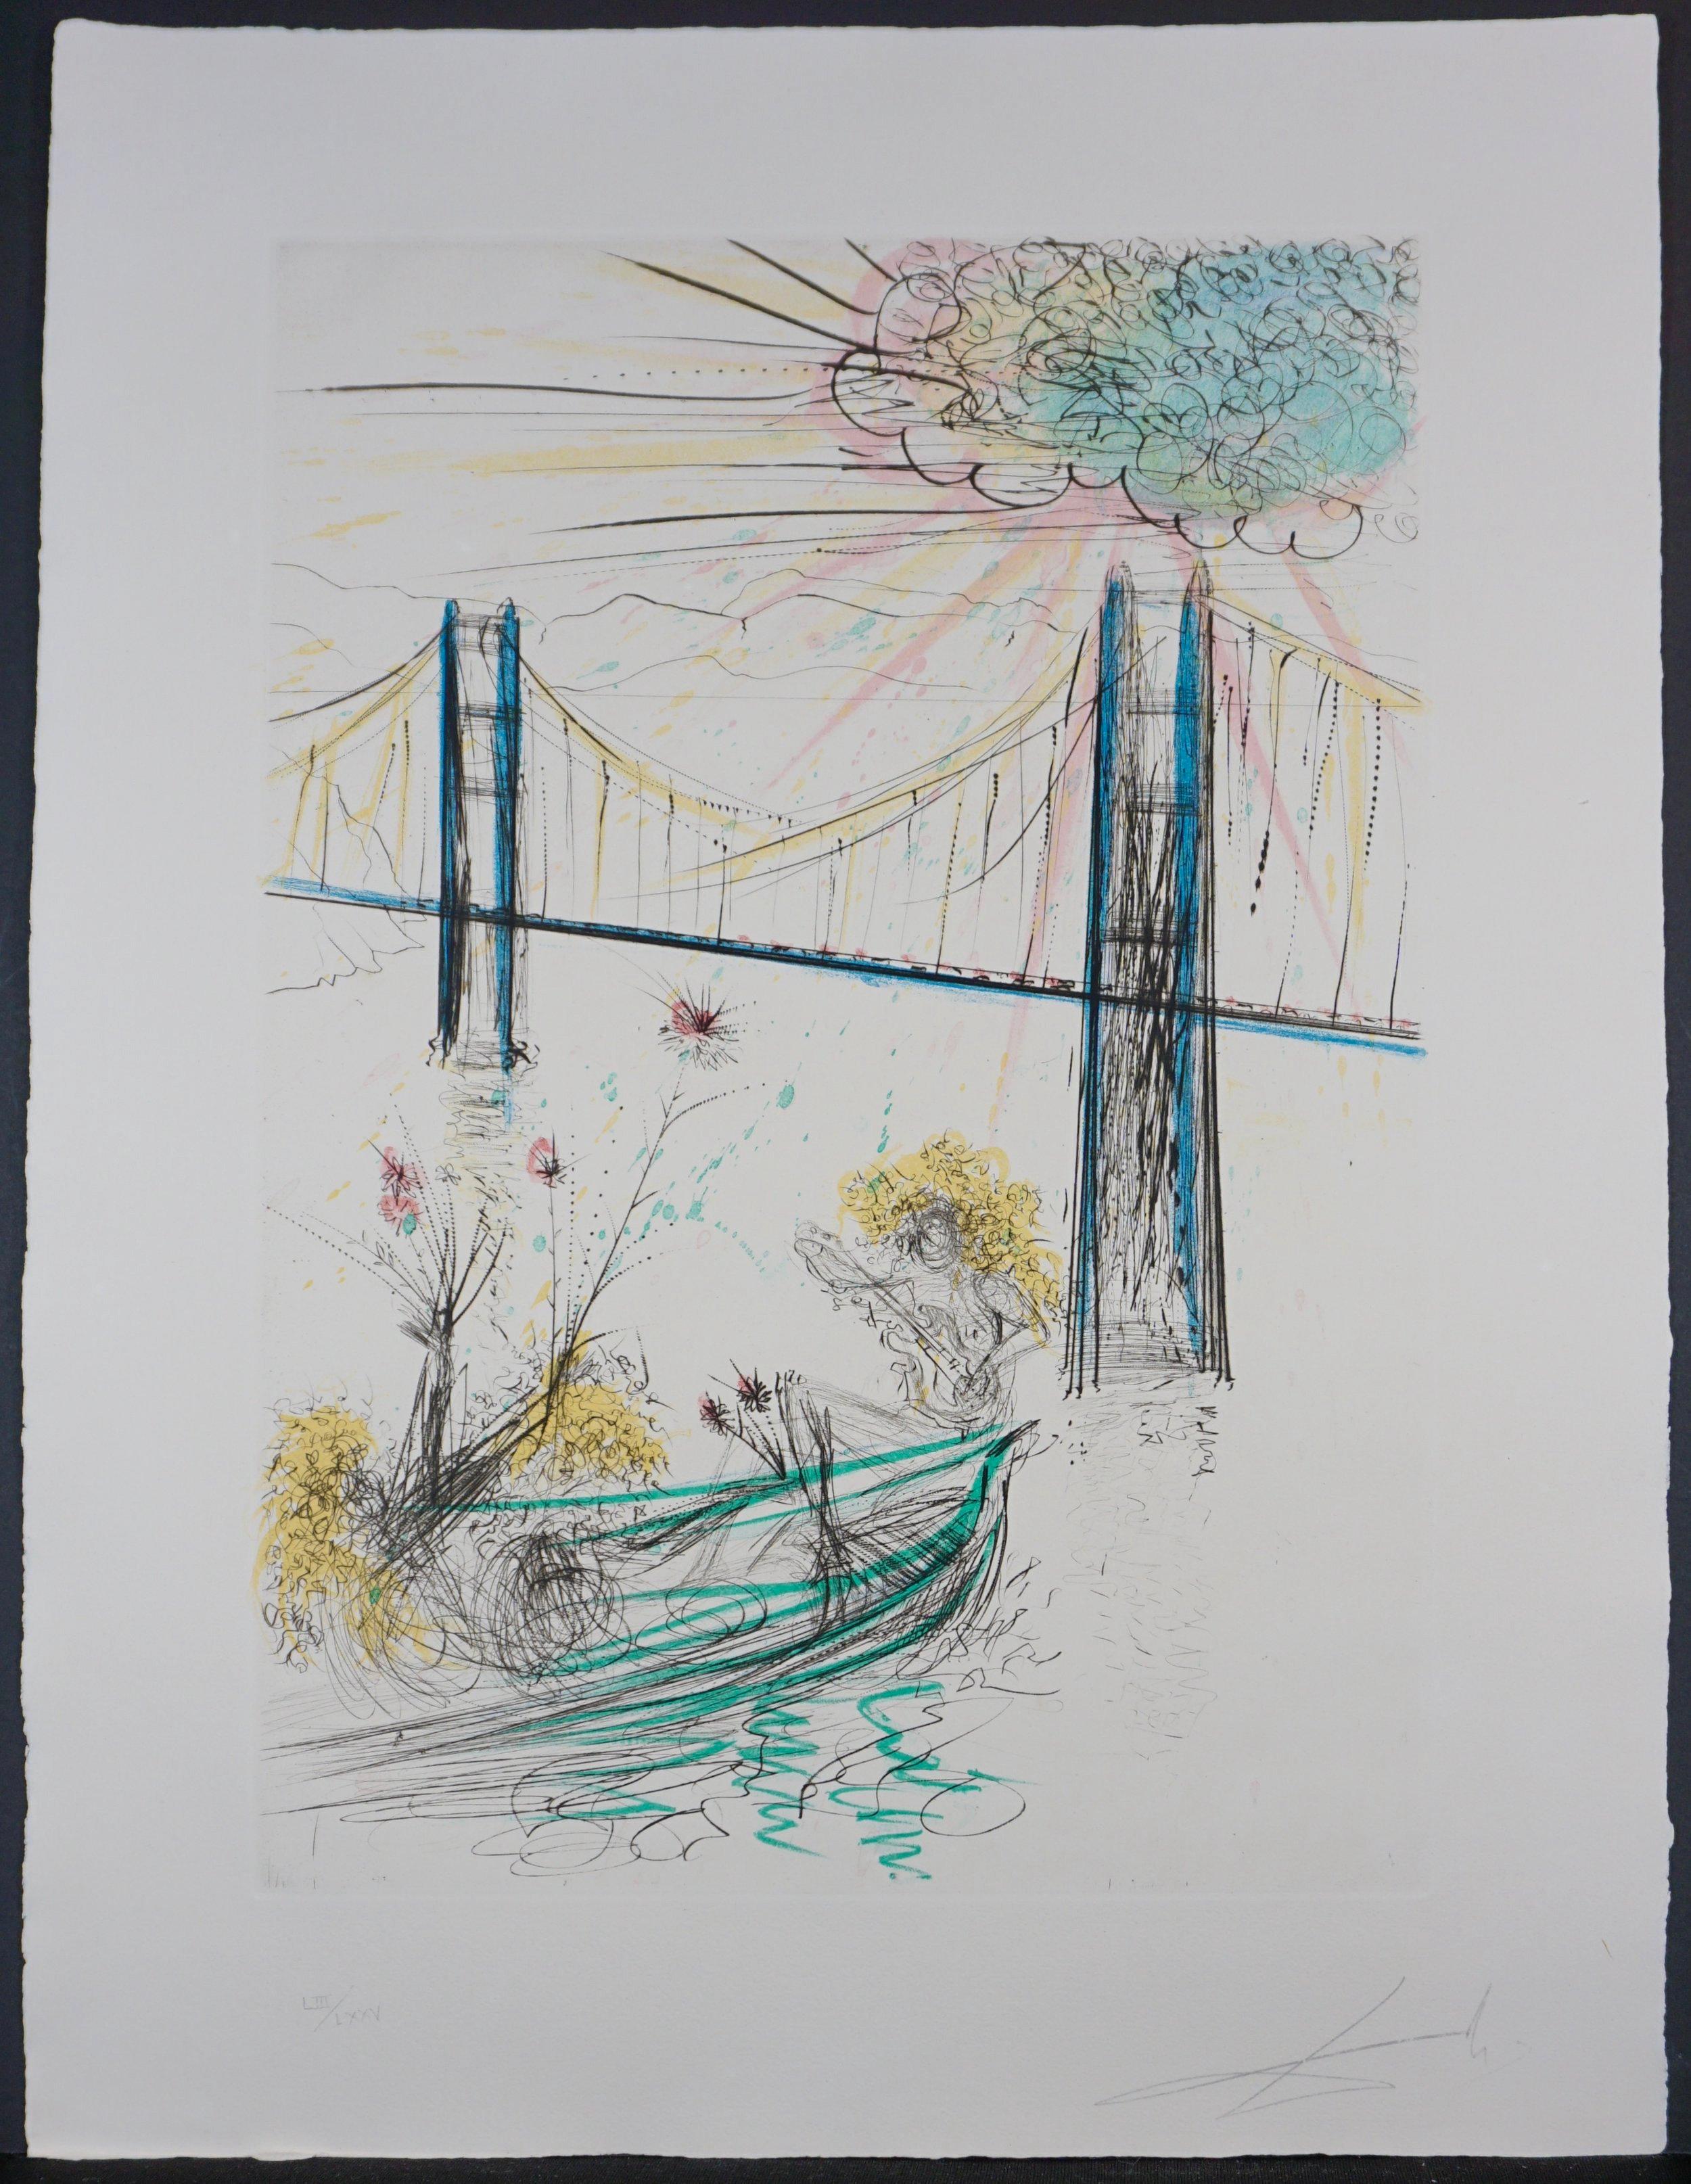 ARTIST: Salvador Dali

TITLE: San Francisco Suite

MEDIUM: 5 Etchings

SIGNED: Each piece is Hand Signed 

PUBLISHER: Jean Schneider, Basel

EDITION NUMBER: LIII/LXXV matched numbered 

MEASUREMENTS: 19.75